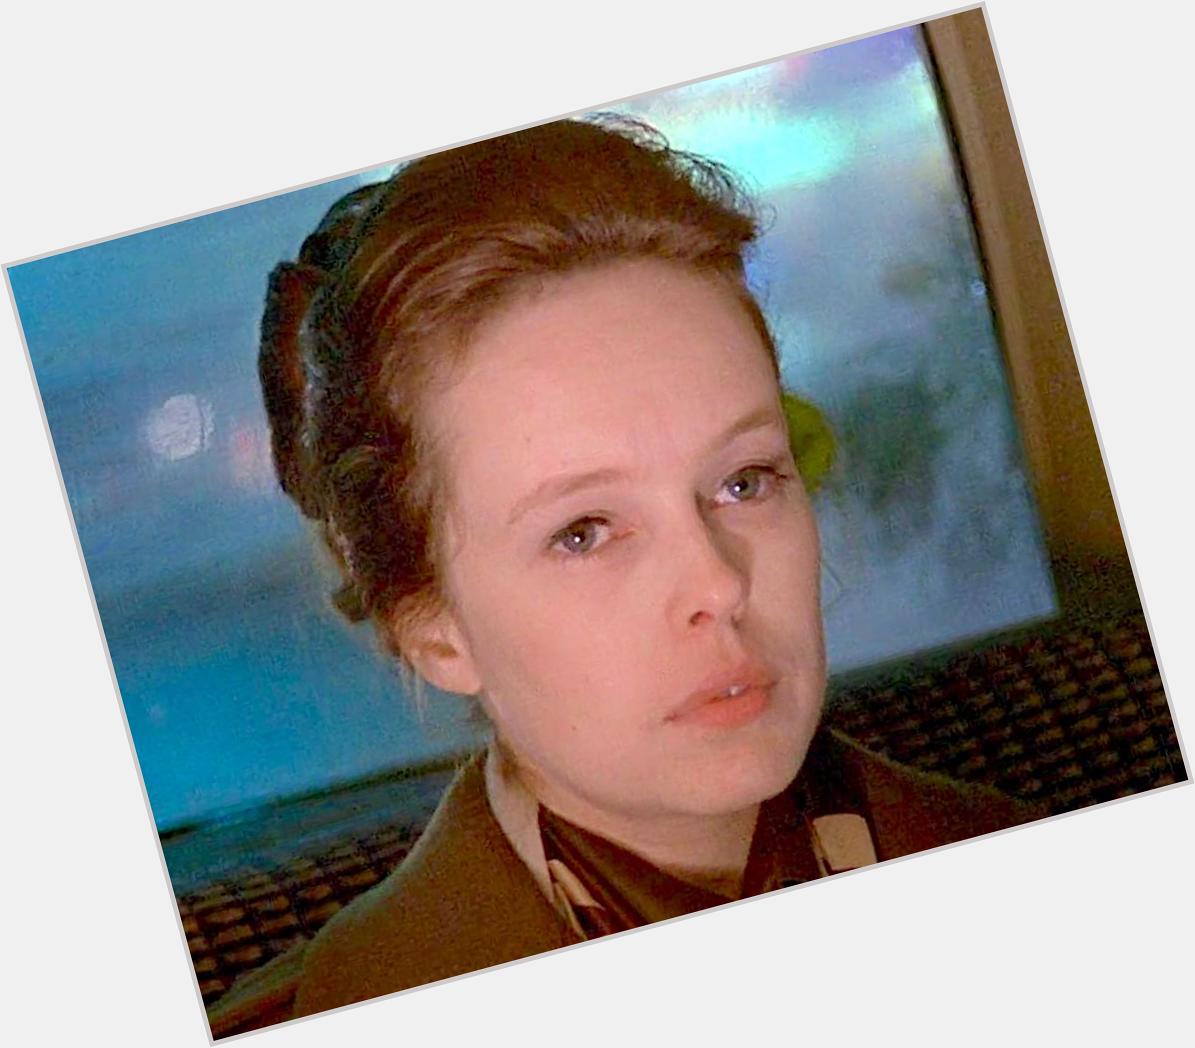 HAPPY BIRTHDAY & RIP SANDY DENNIS 
Apr 27, 1937 - Mar 2, 1992

That Cold Day in the Park (1969) 